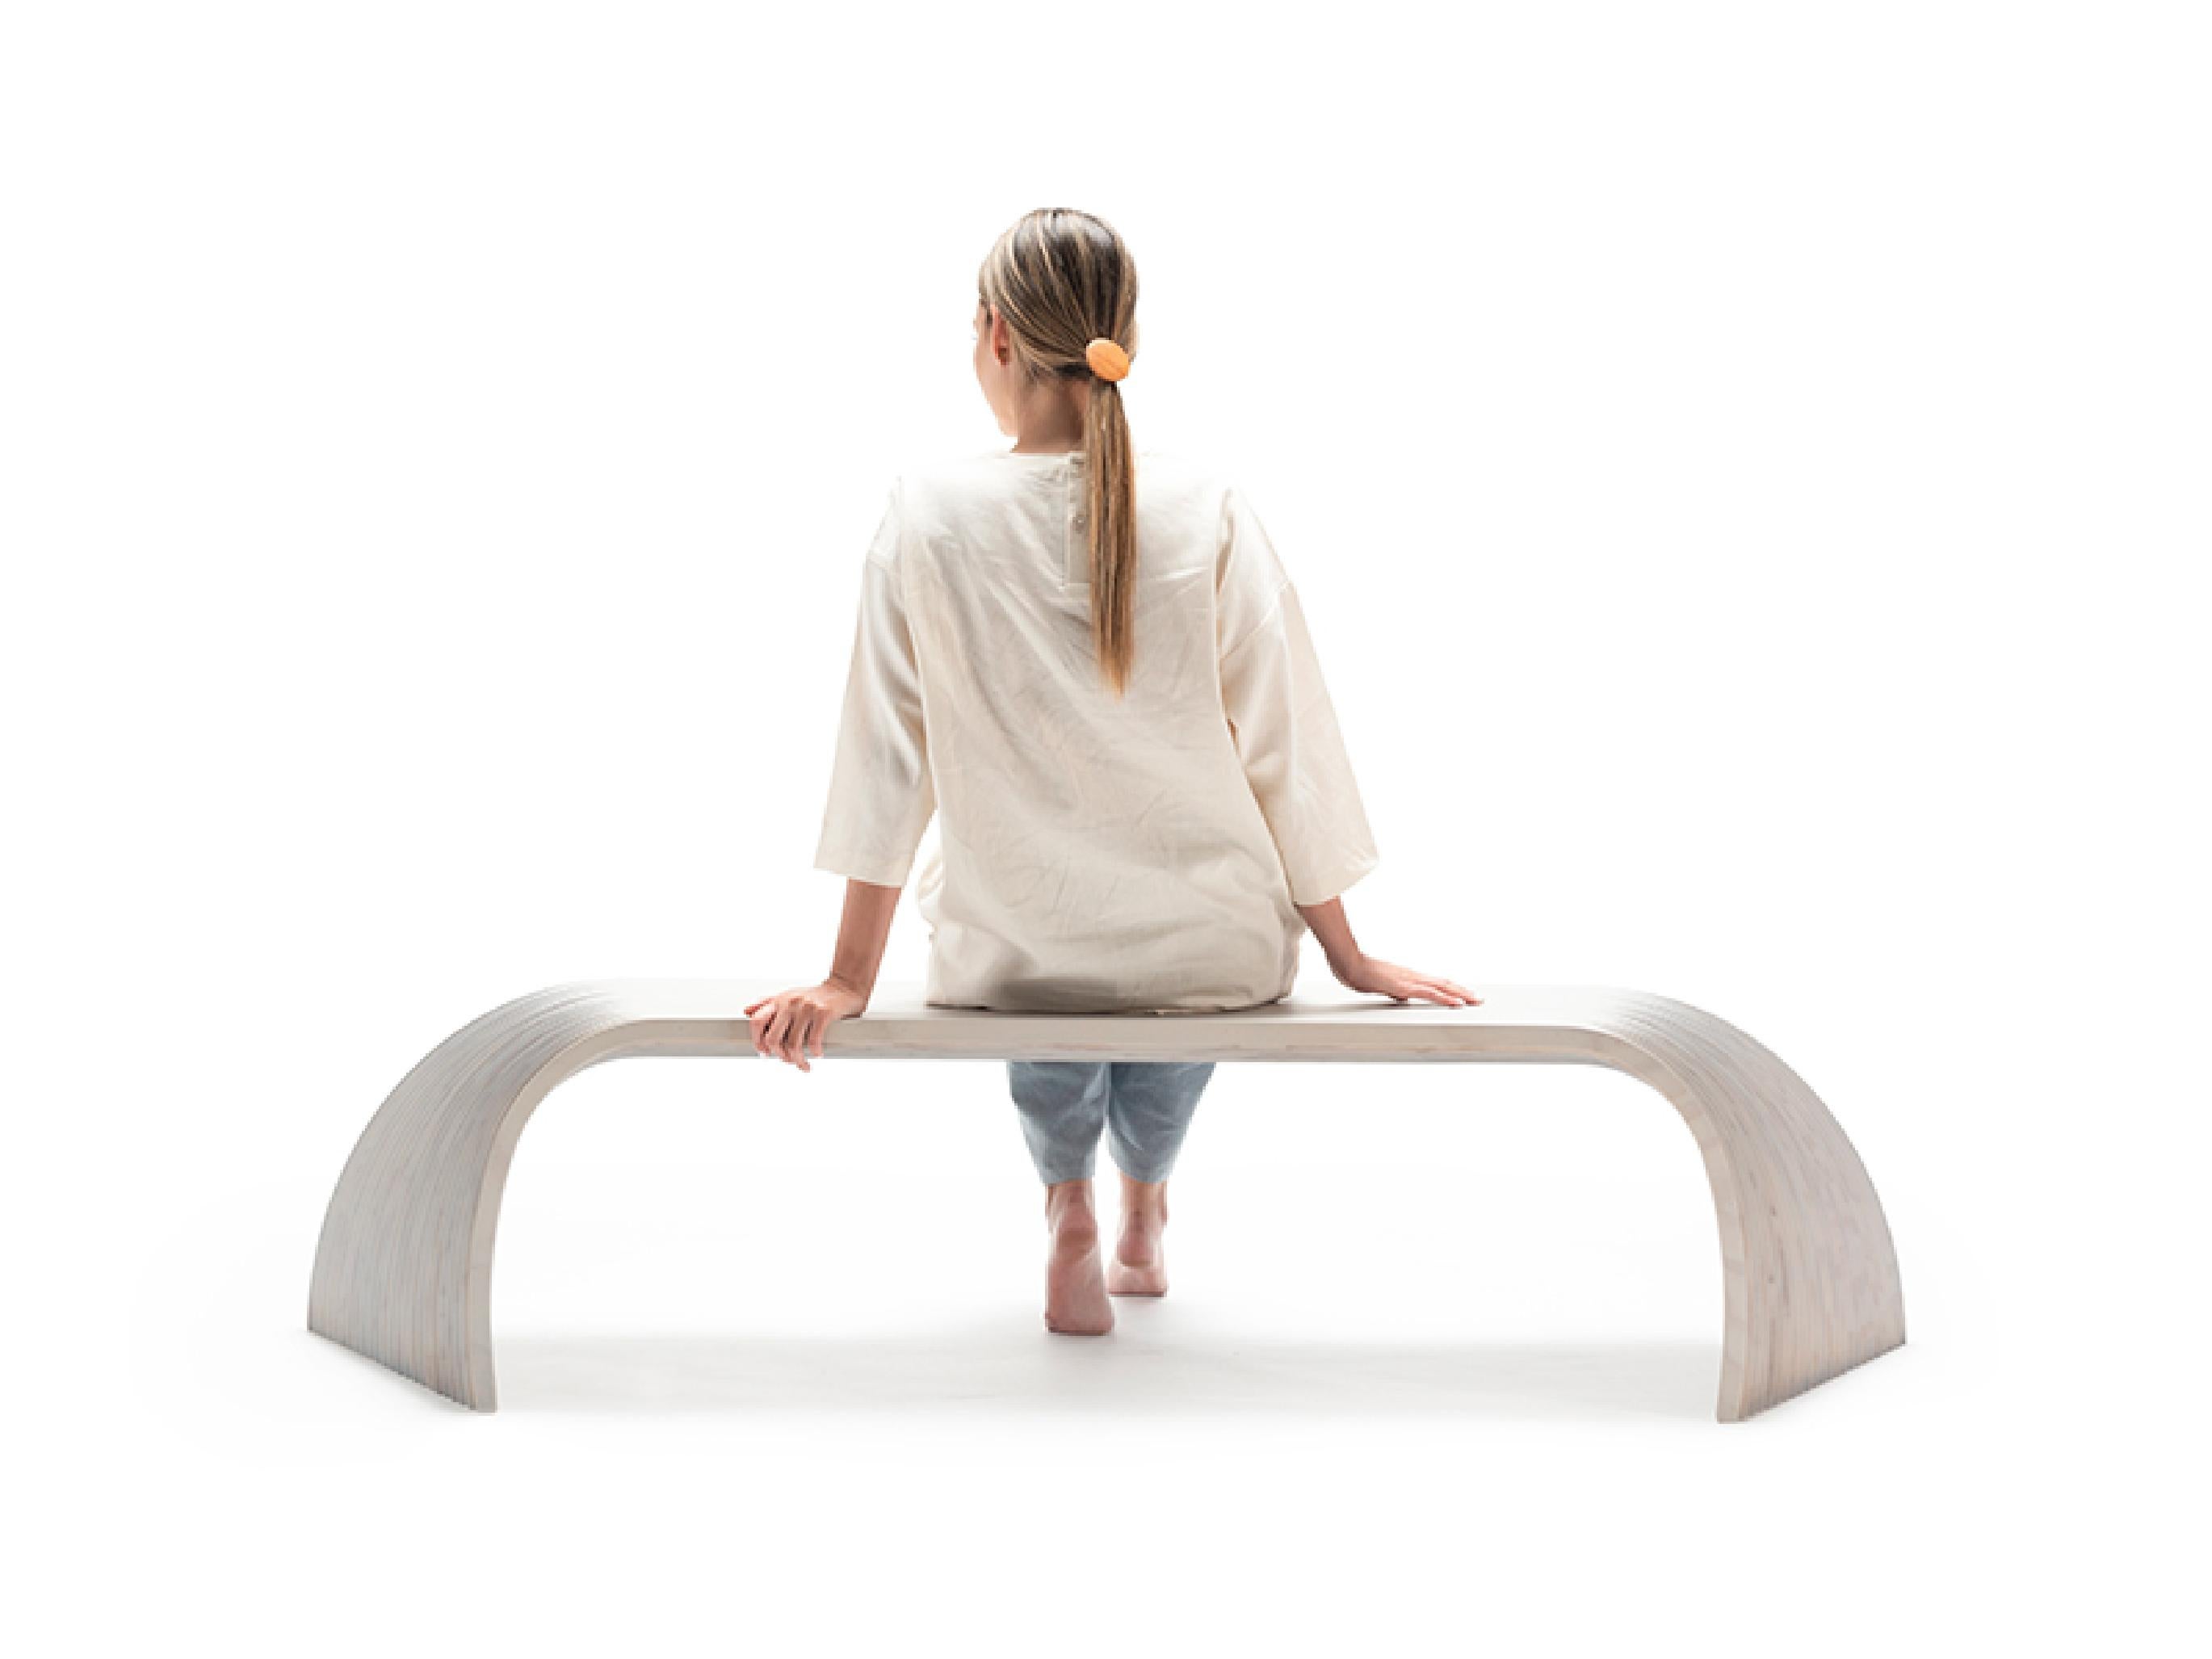 Laminated Arches Small by Piegatto, A Sculptural Bench For Sale